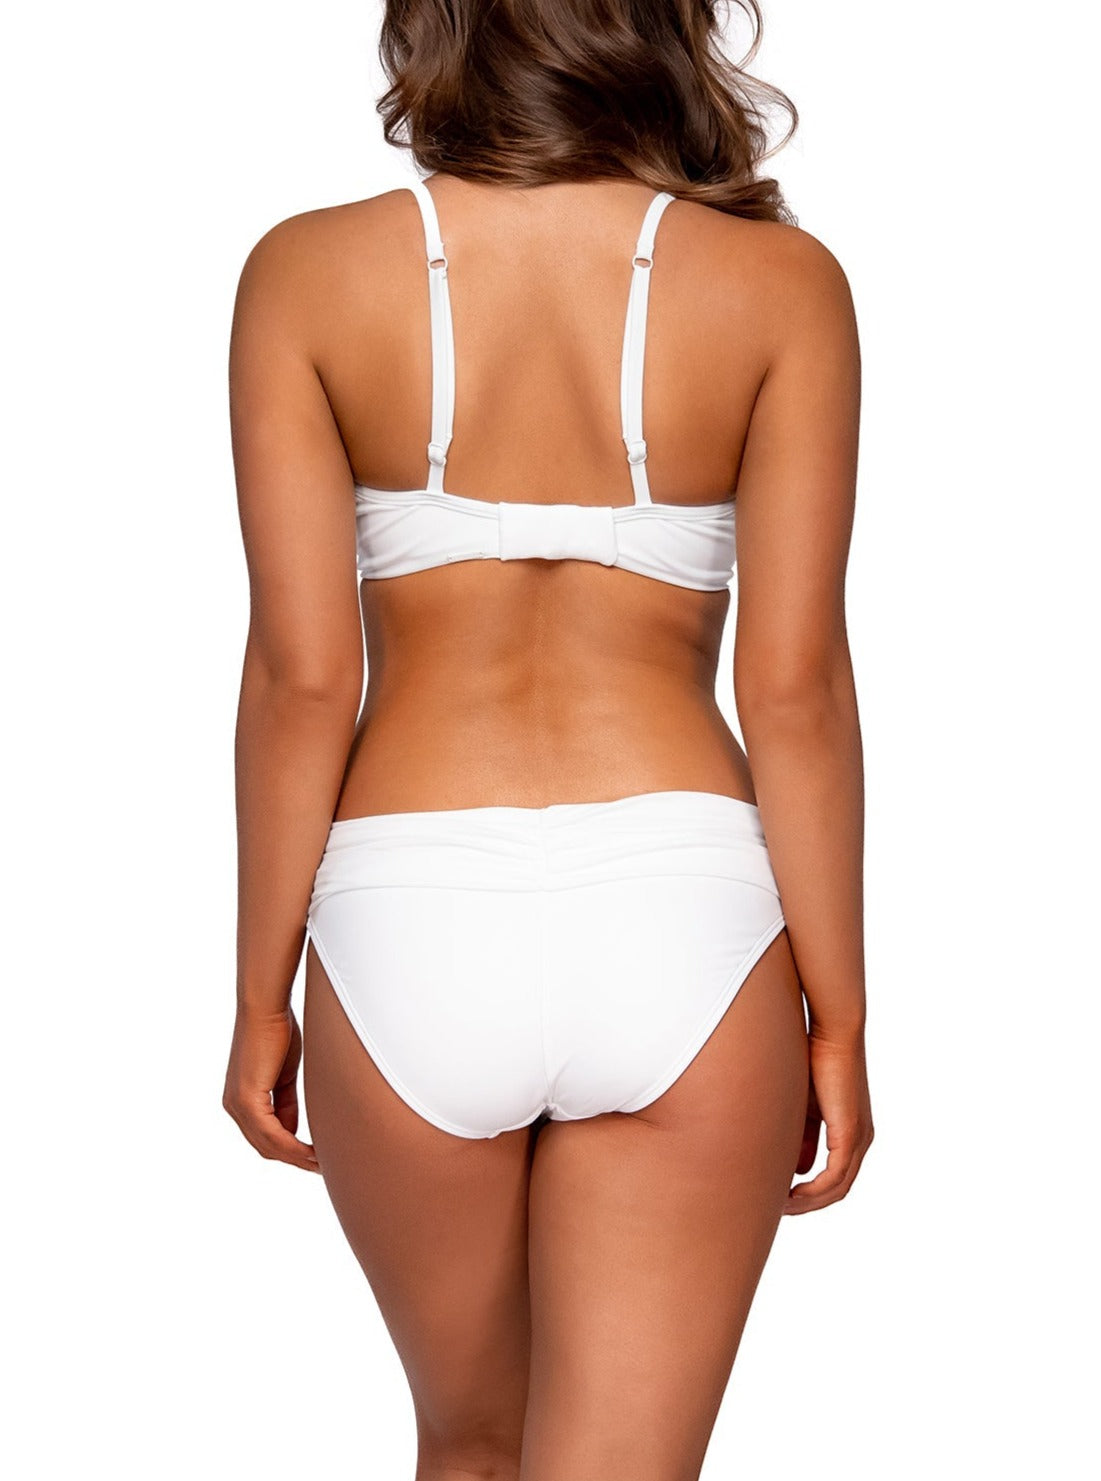 Sunsets "Brands,Swimwear" 32D/34C / WHILI / 52 Sunsets White Lily Crossroads Underwire Top